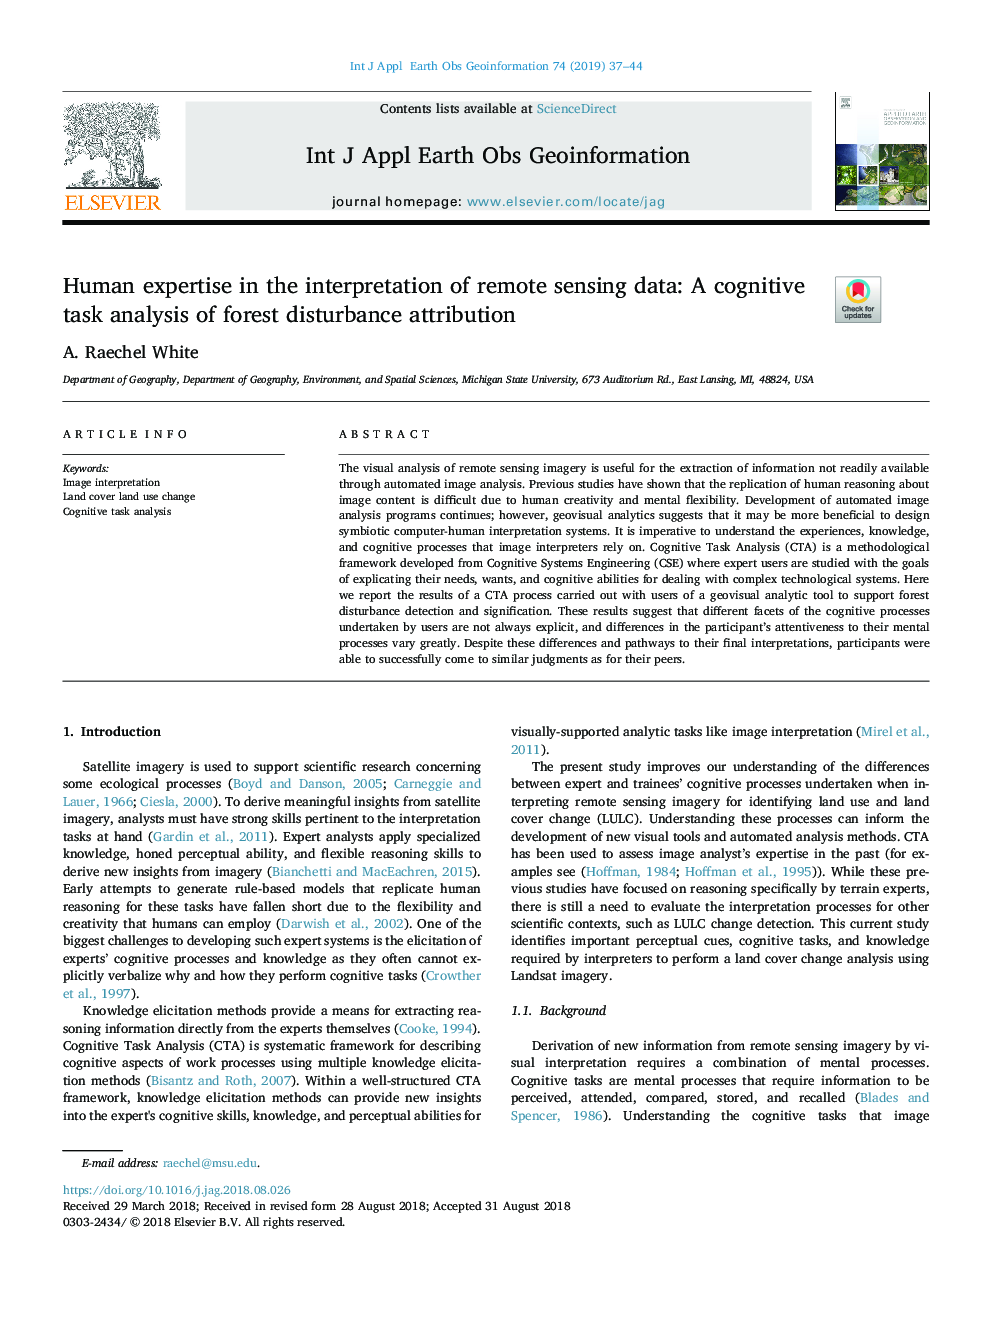 Human expertise in the interpretation of remote sensing data: A cognitive task analysis of forest disturbance attribution